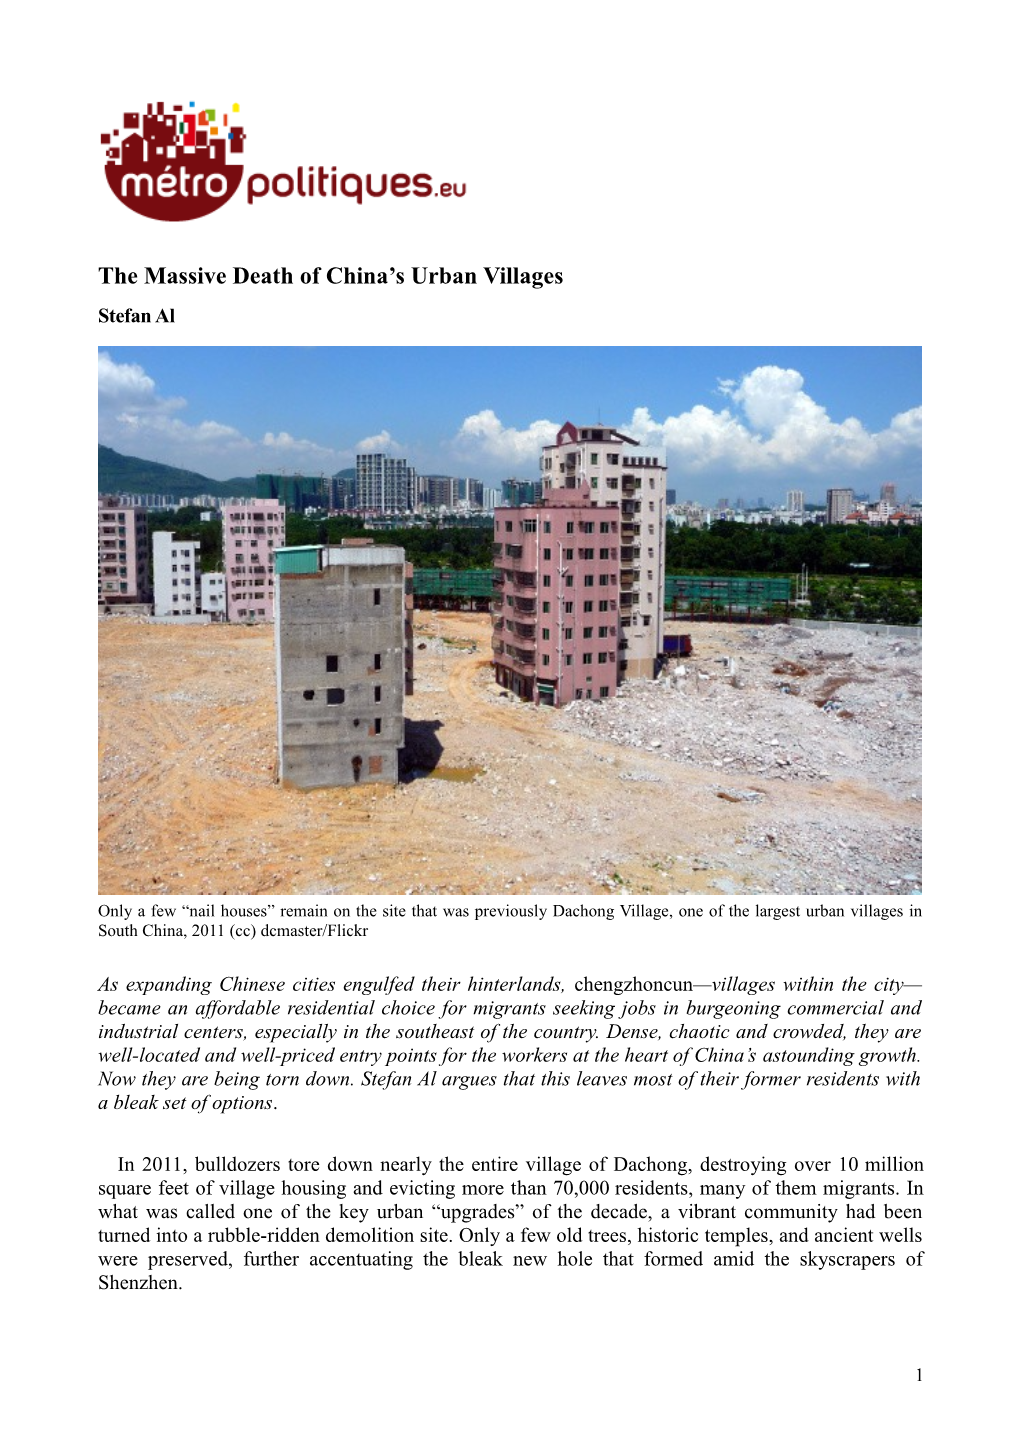 The Massive Death of China's Urban Villages